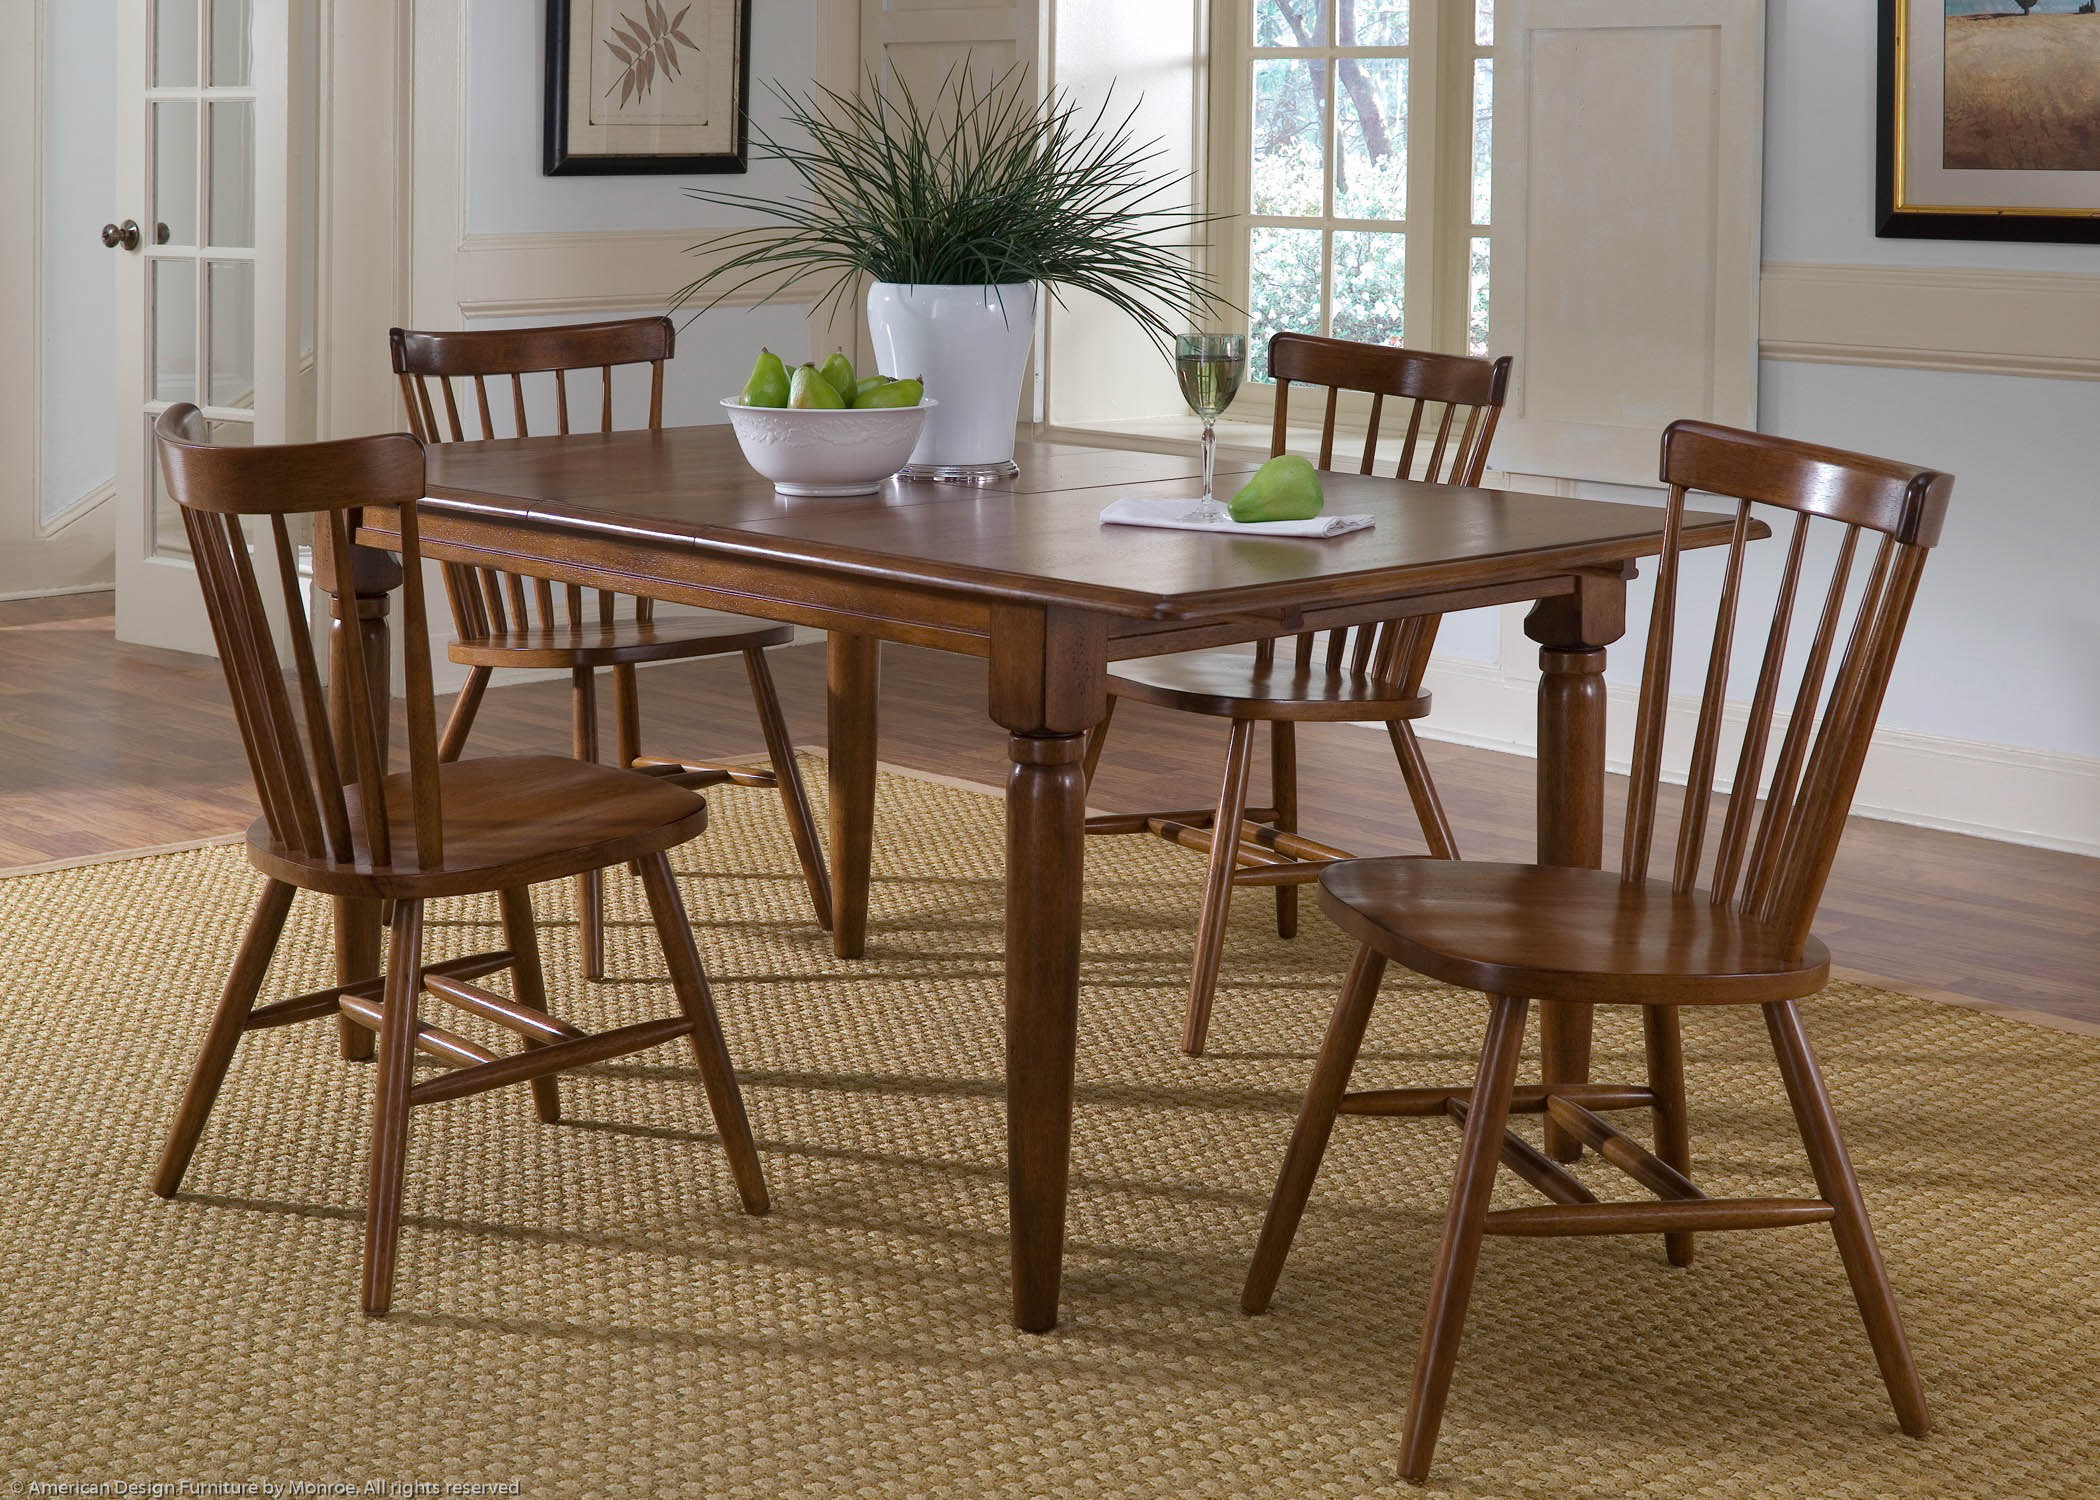 Nantucket Casual Table Pic 5 (Heading Butterfly Leaf Table (Tobacco)